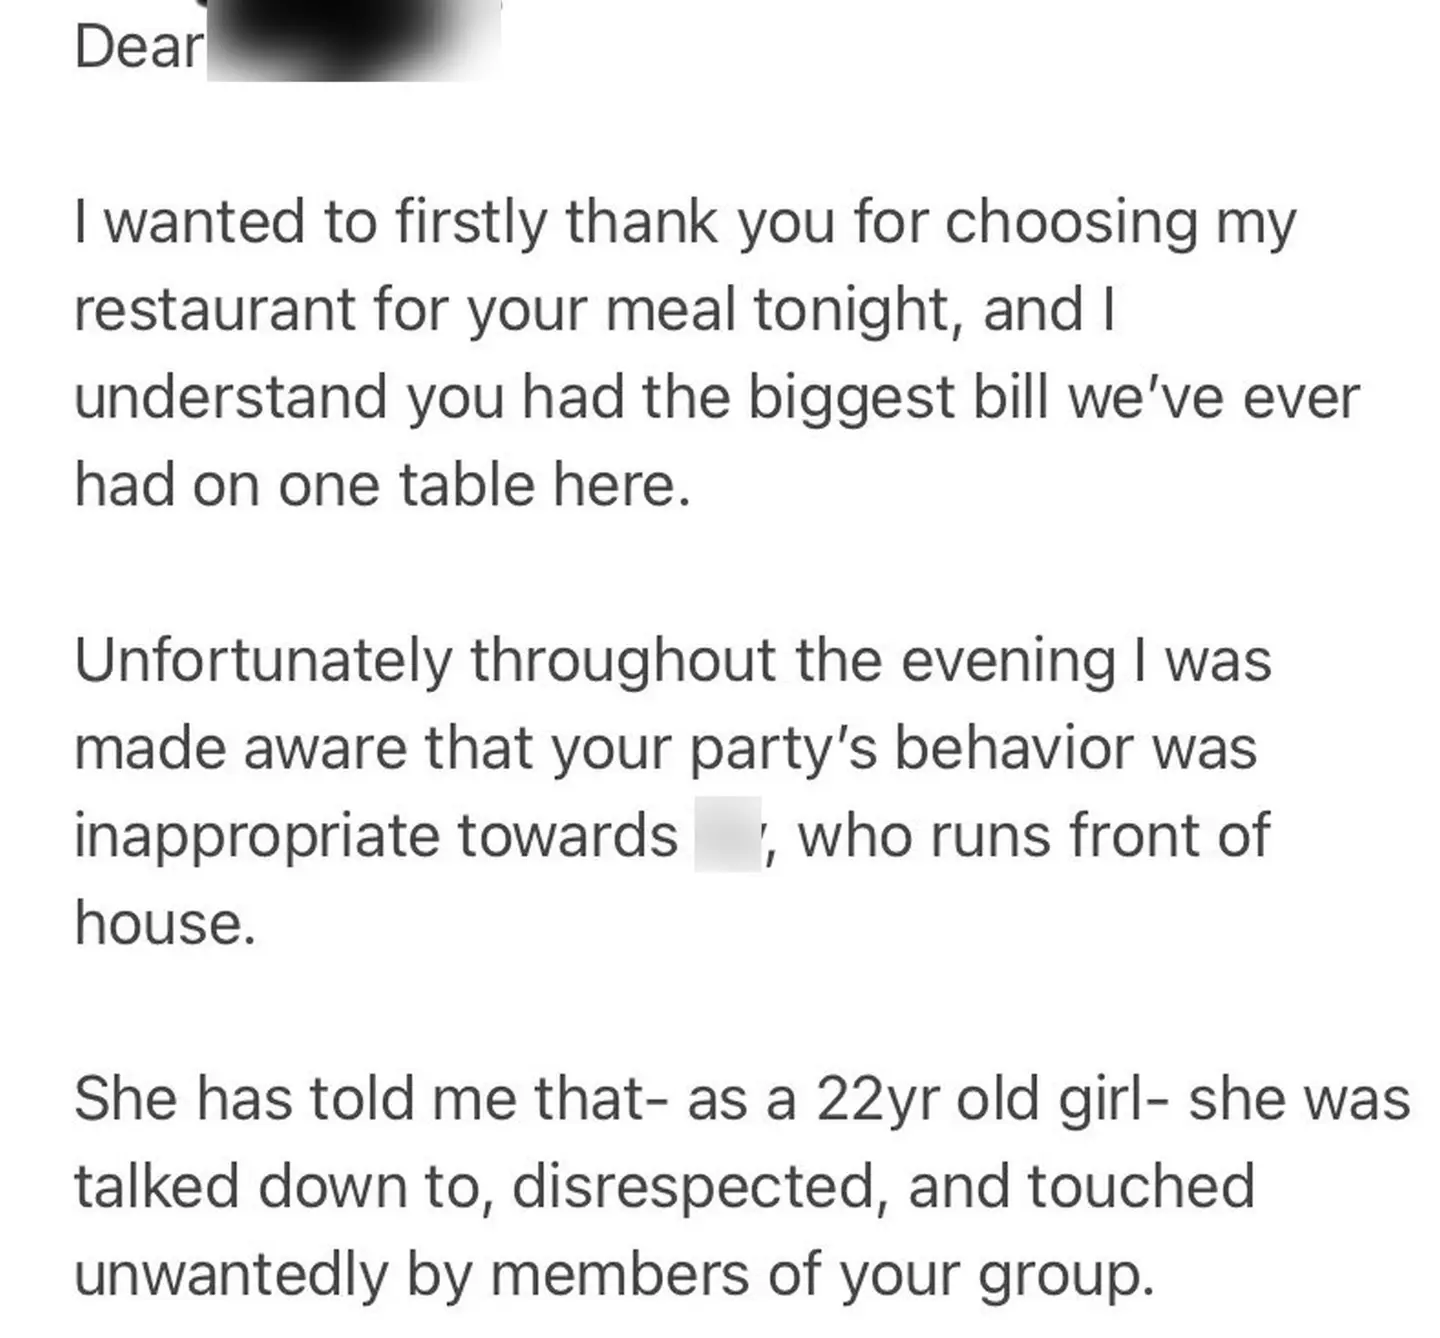 The chef sent an email to the customers.